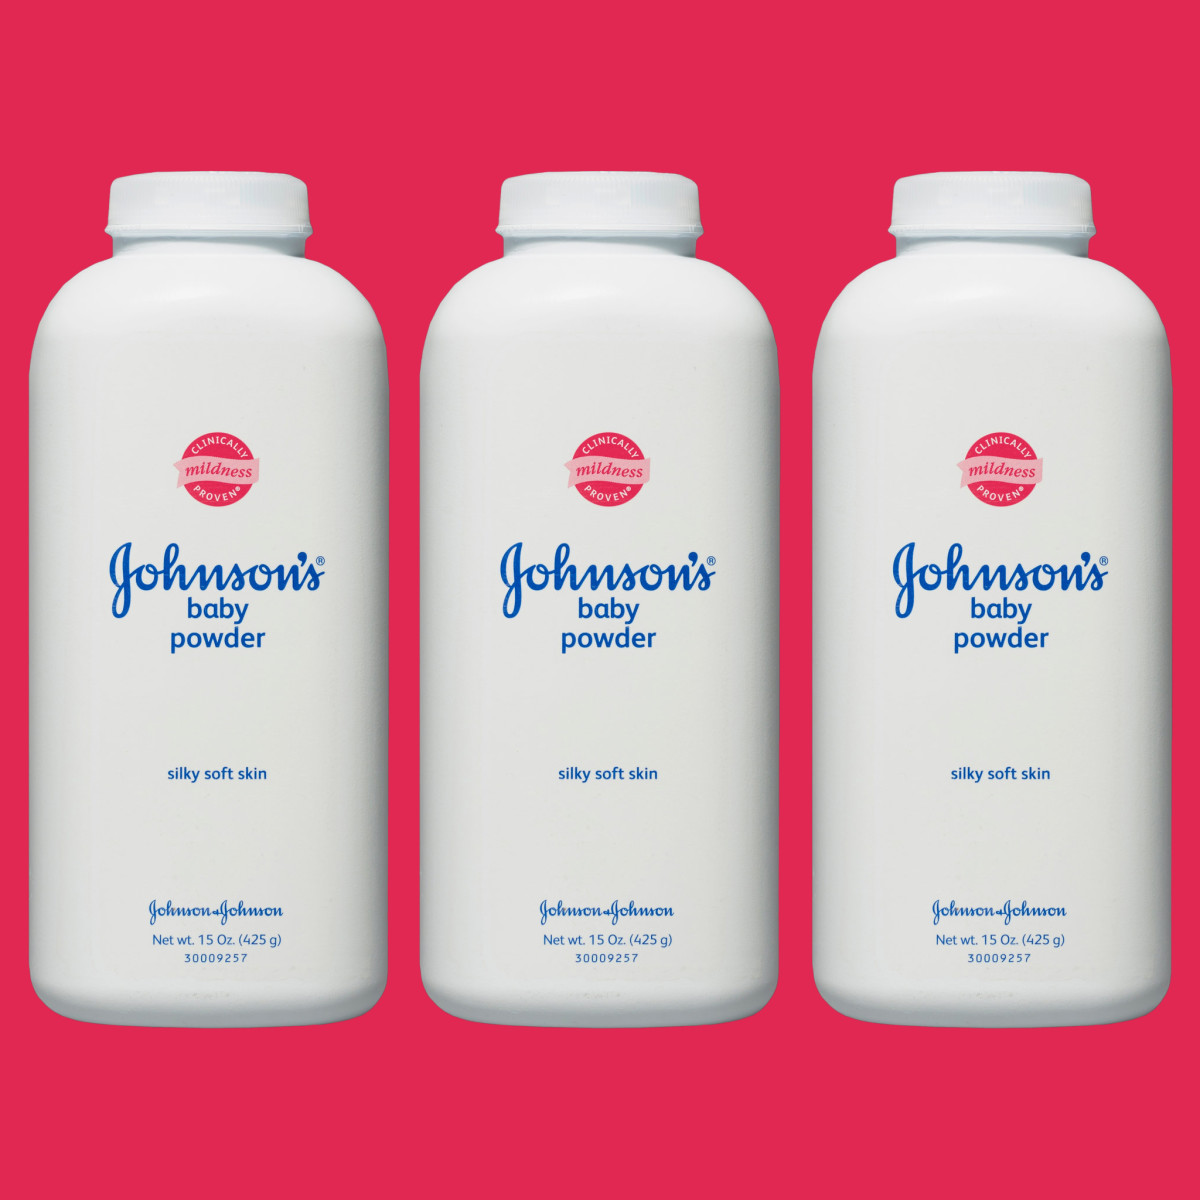 Johnson & Johnson replaced talc with cornstarch in baby powder sold in North America in 2020, and will stop selling talc-based baby powder anywhere in the world in 2023.